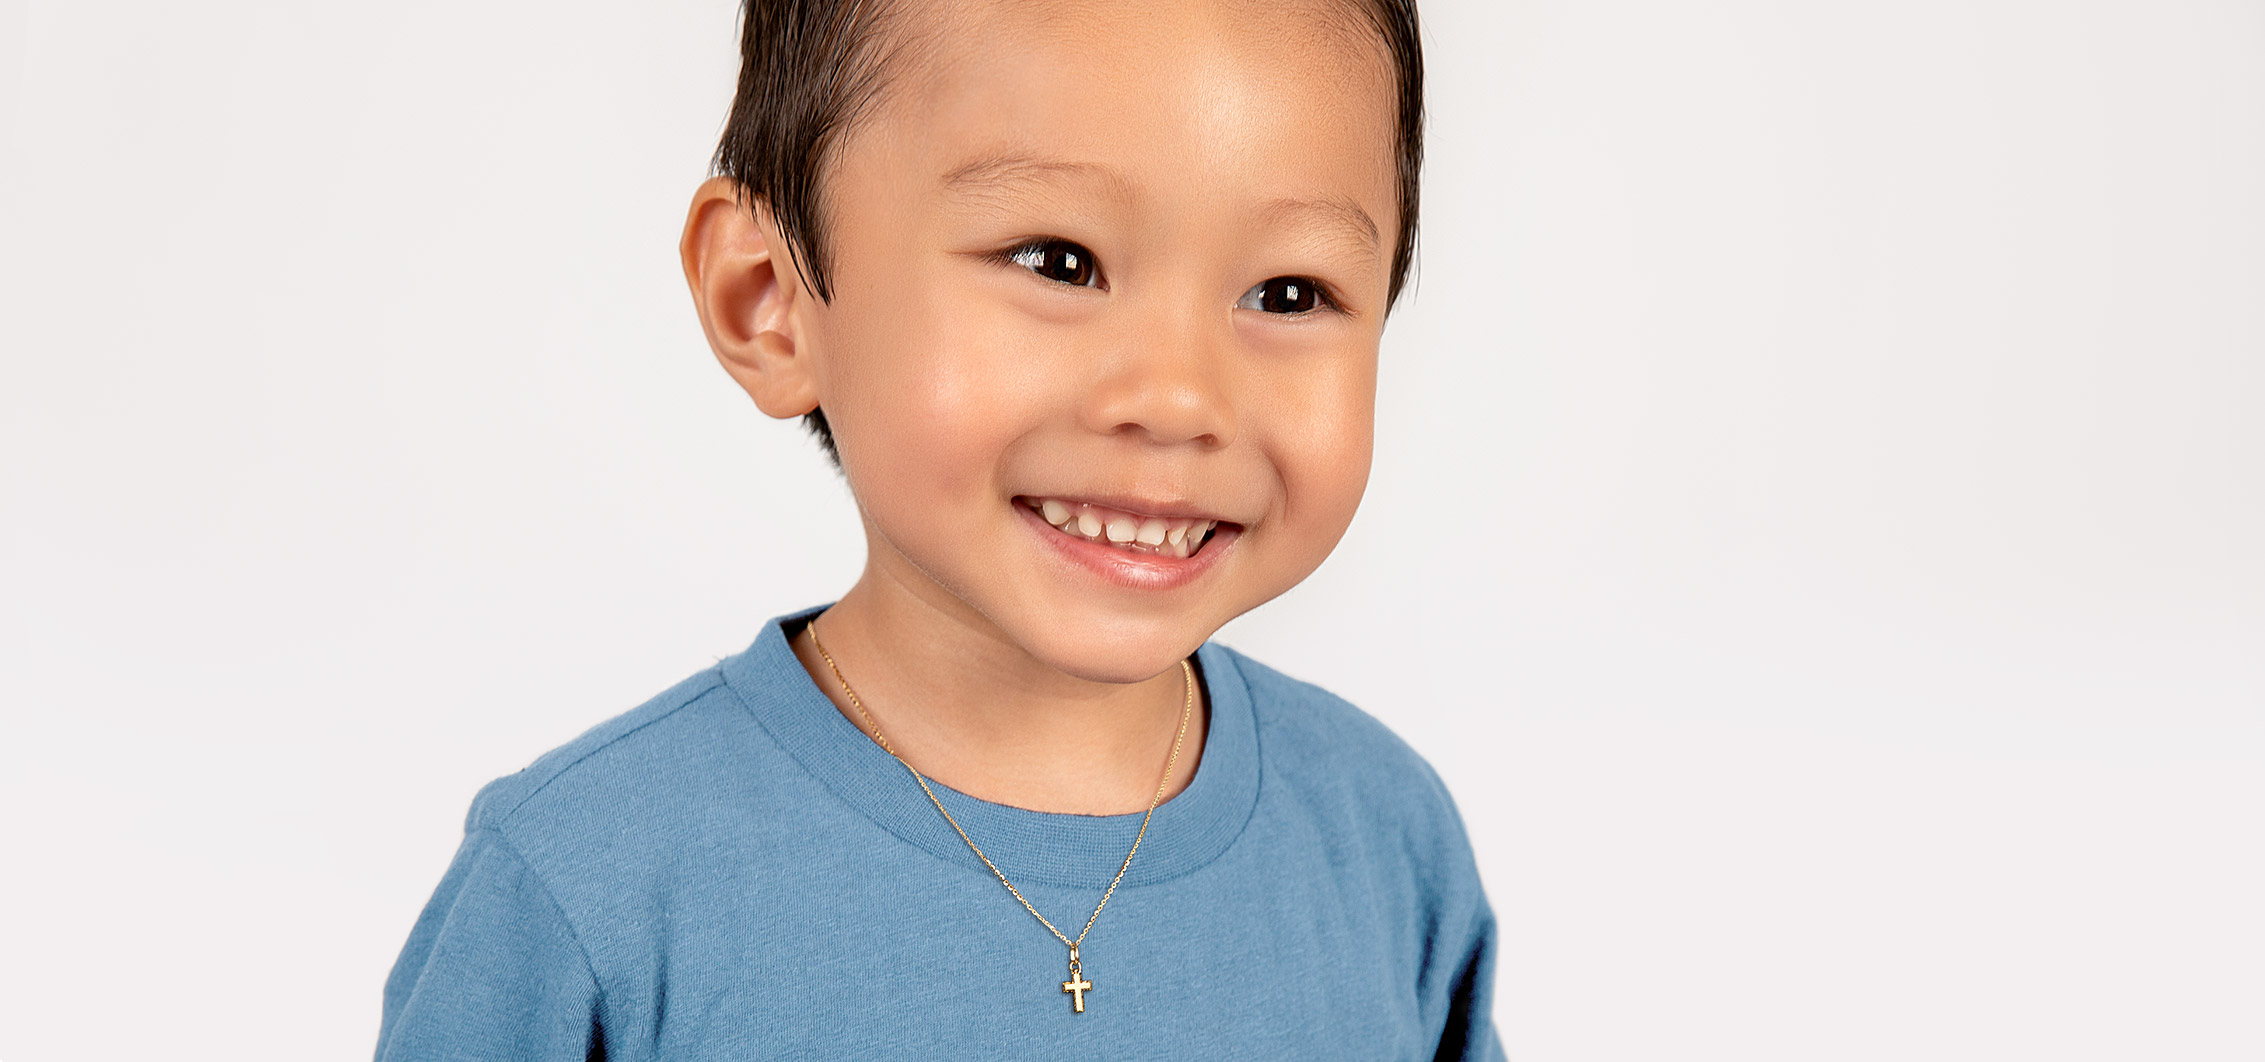 Gold Necklaces for Boys